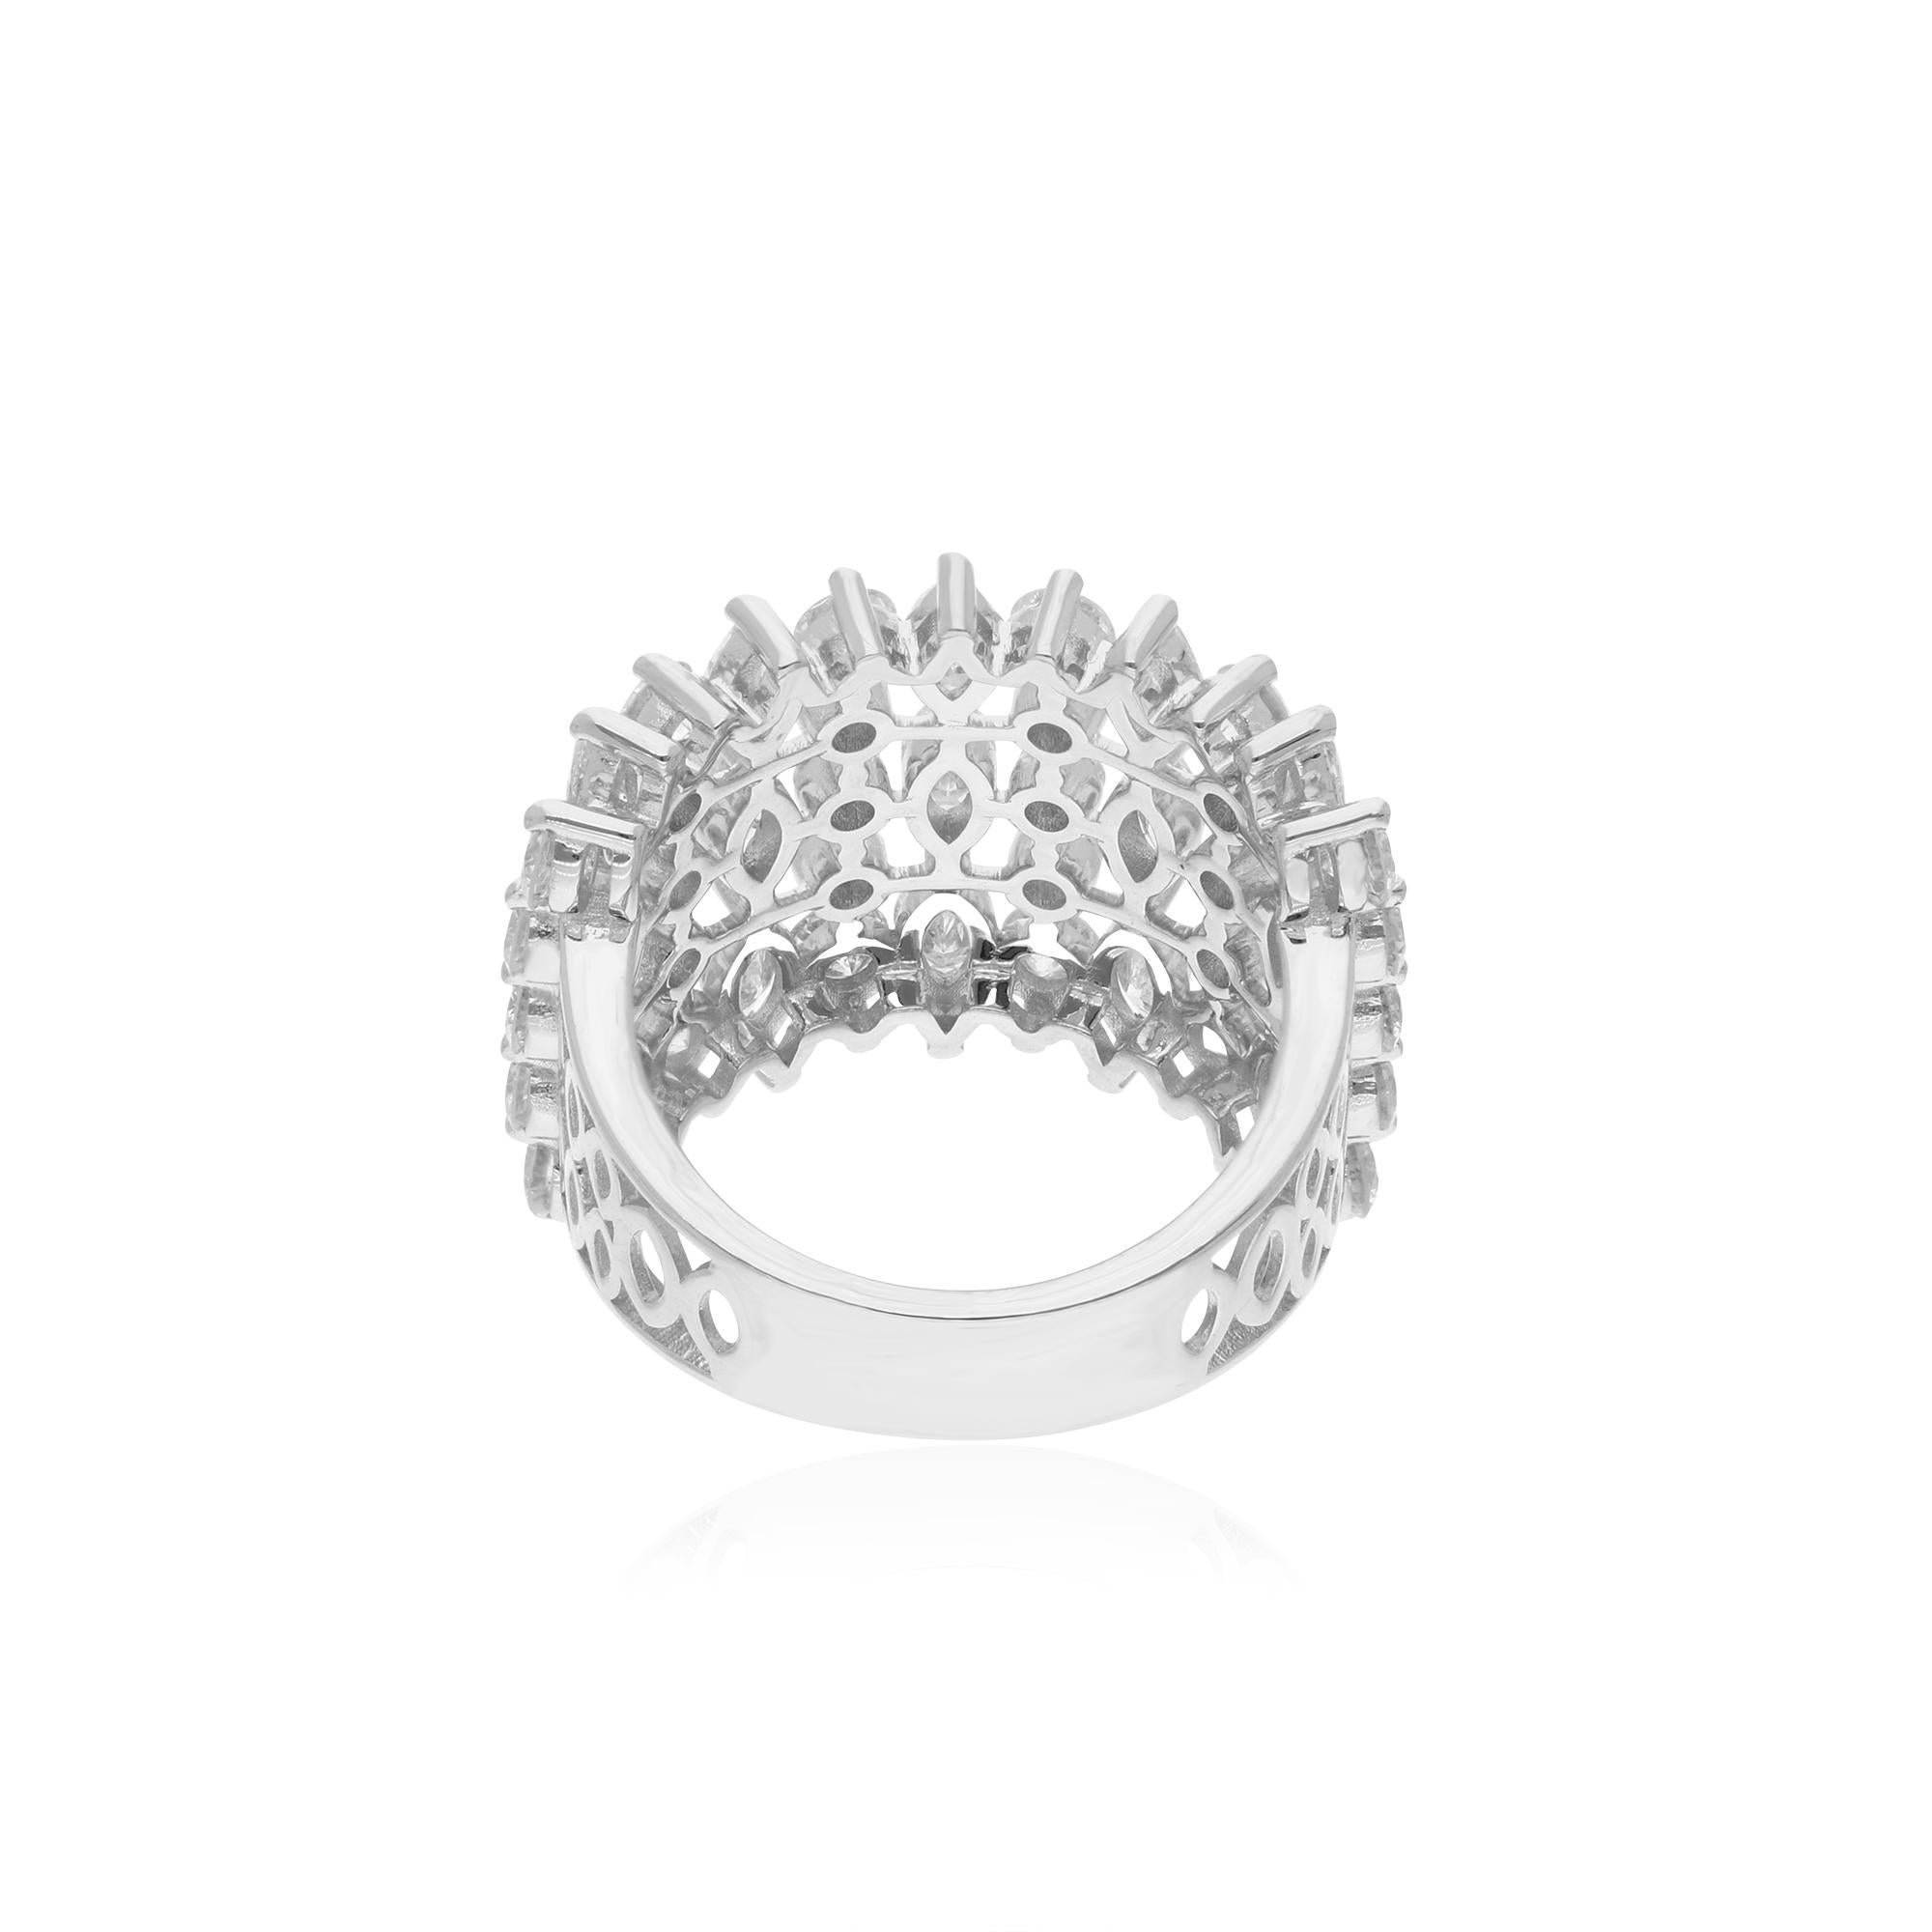 Women's 3.99 Carat Marquise & Round Diamond Cage Ring 14 Karat White Gold Fine Jewelry For Sale